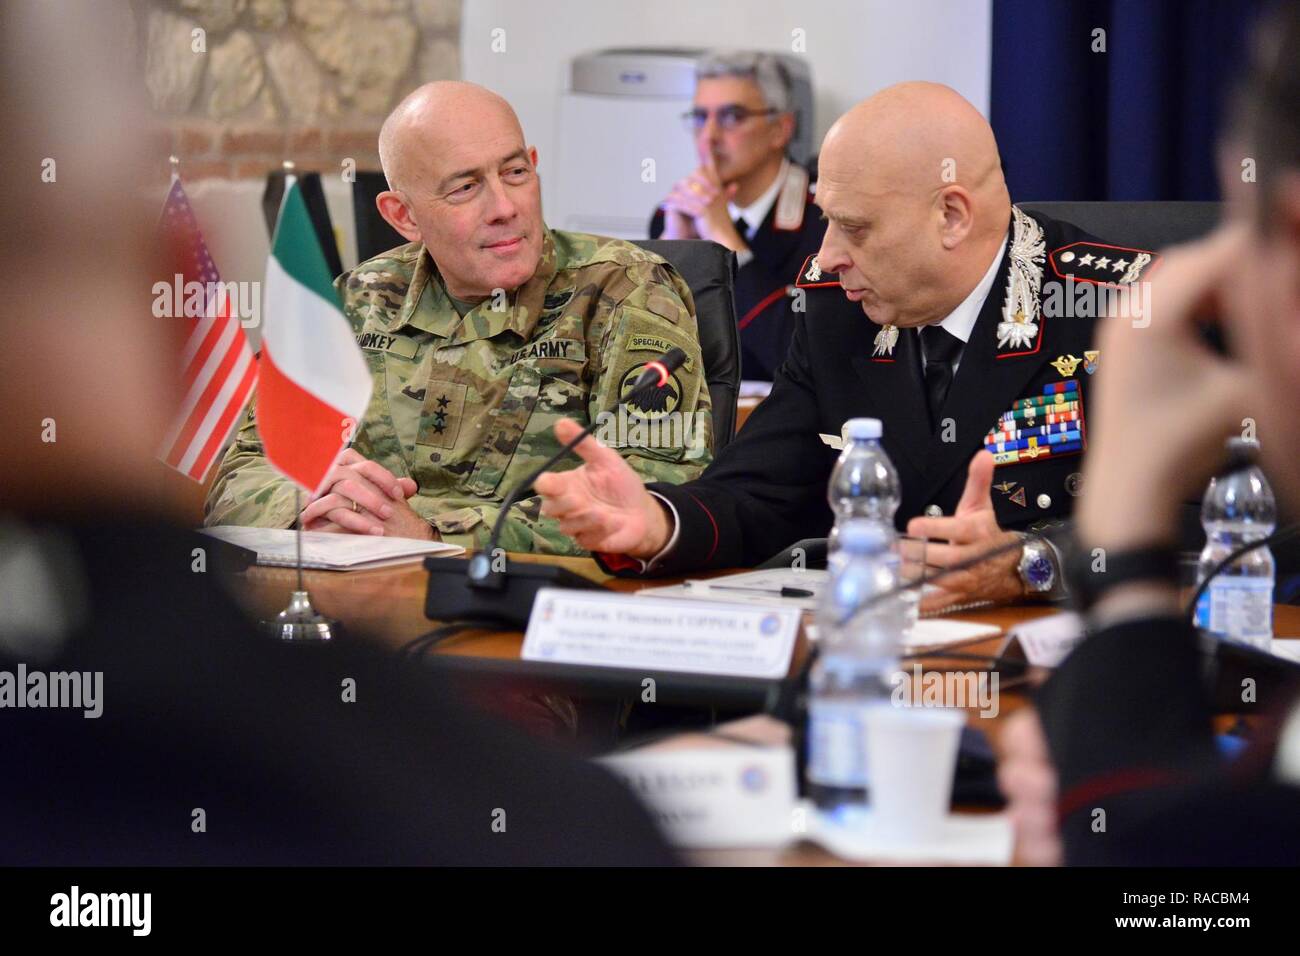 Lt. Gen Vincenzo Coppola (left), Commanding General “Palidoro” Carabinieri Specialized and Mobile Units, talk with Lt. Gen. Charles D. Luckey (left), Commanding General U.S. Army Reserve Command, during the visit at Center of Excellence for Stability Police Units (CoESPU) Vicenza, Italy, January 20, 2017. Stock Photo